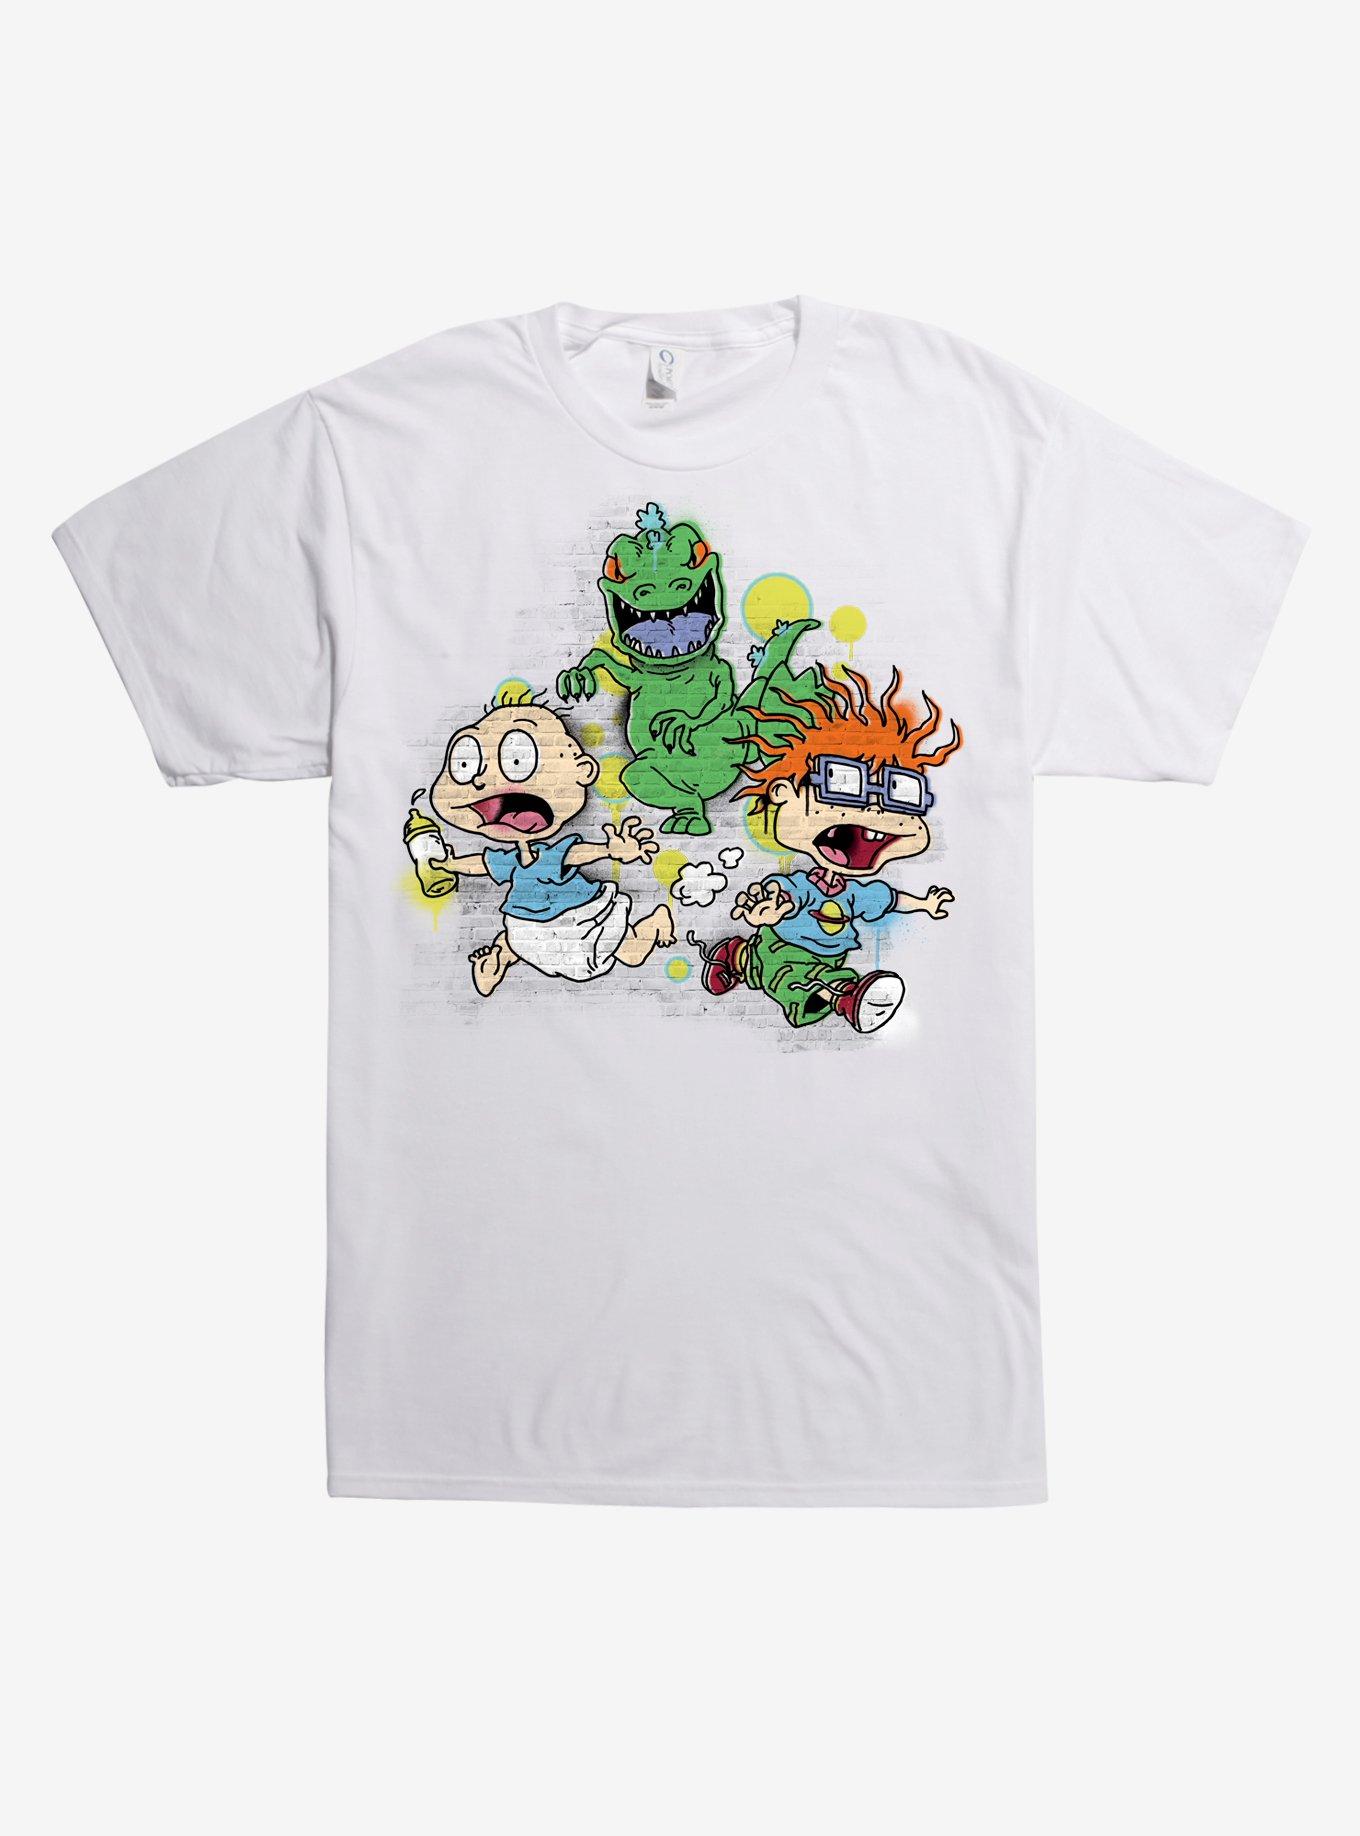 Rugrats Reptar Chase Sketch T-Shirt - WHITE | Hot Topic